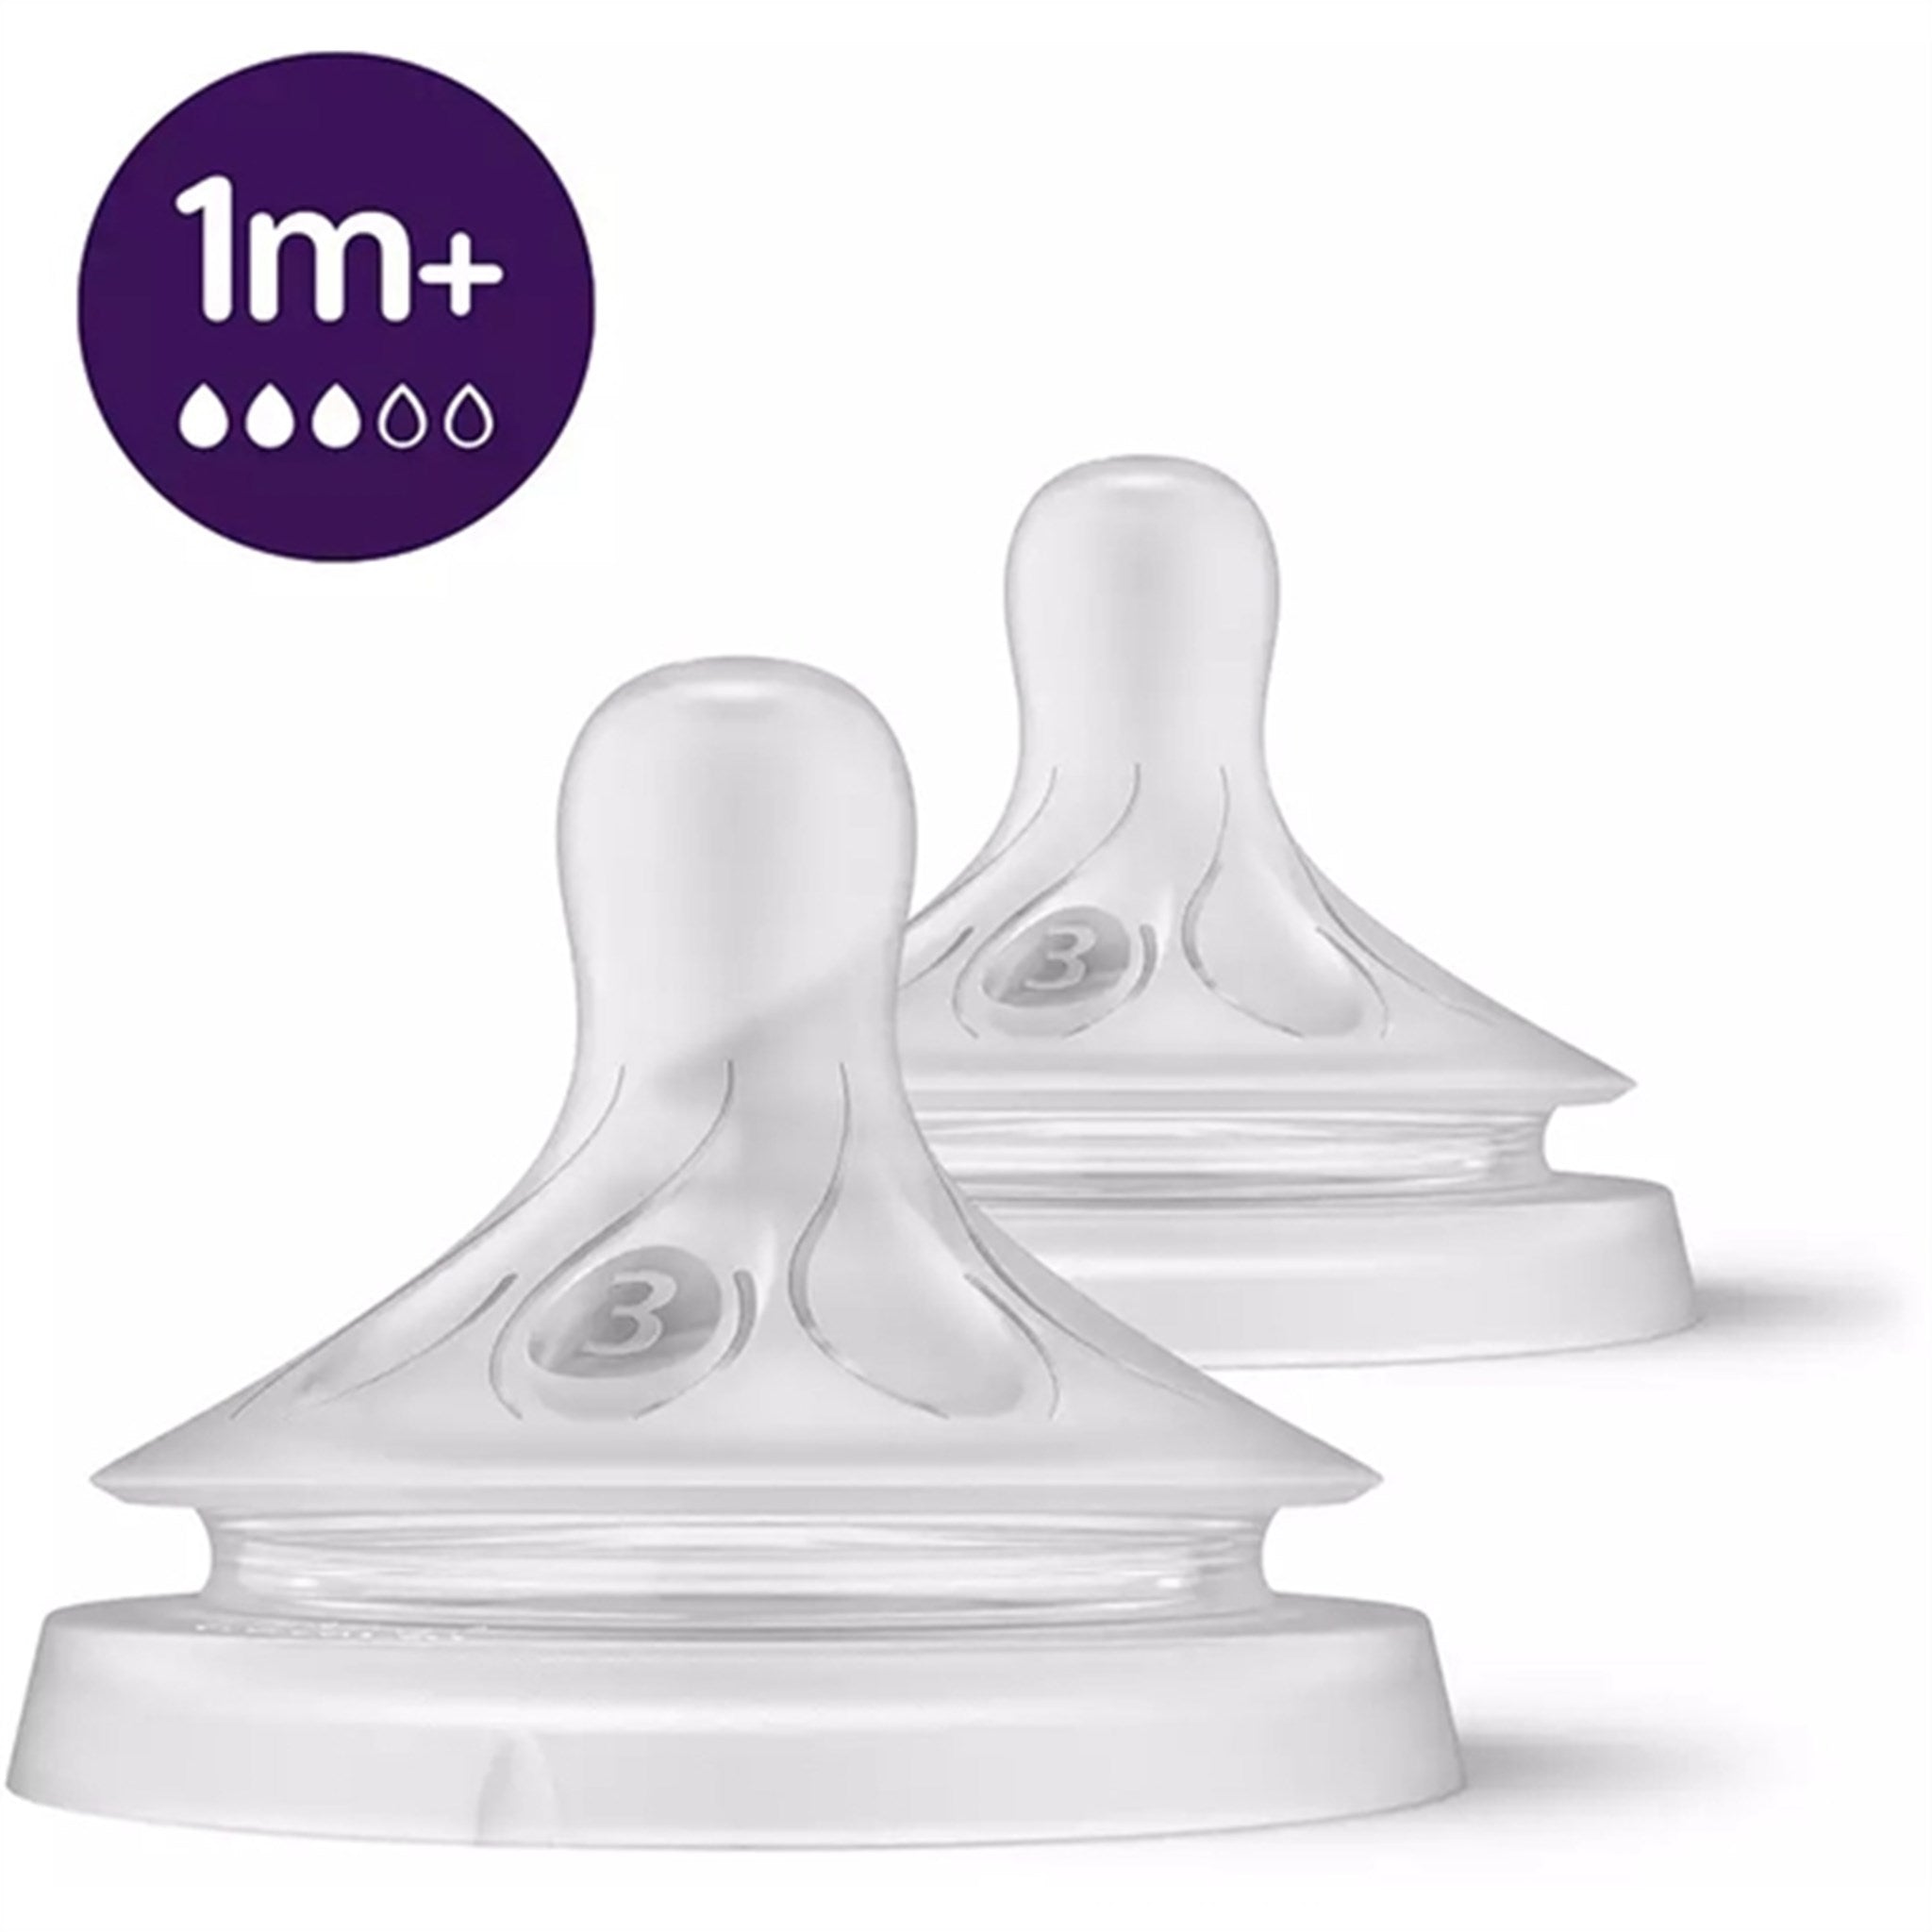 Philips Avent Natural Feeding Bottle Heads Response 1 months 2-pack 2